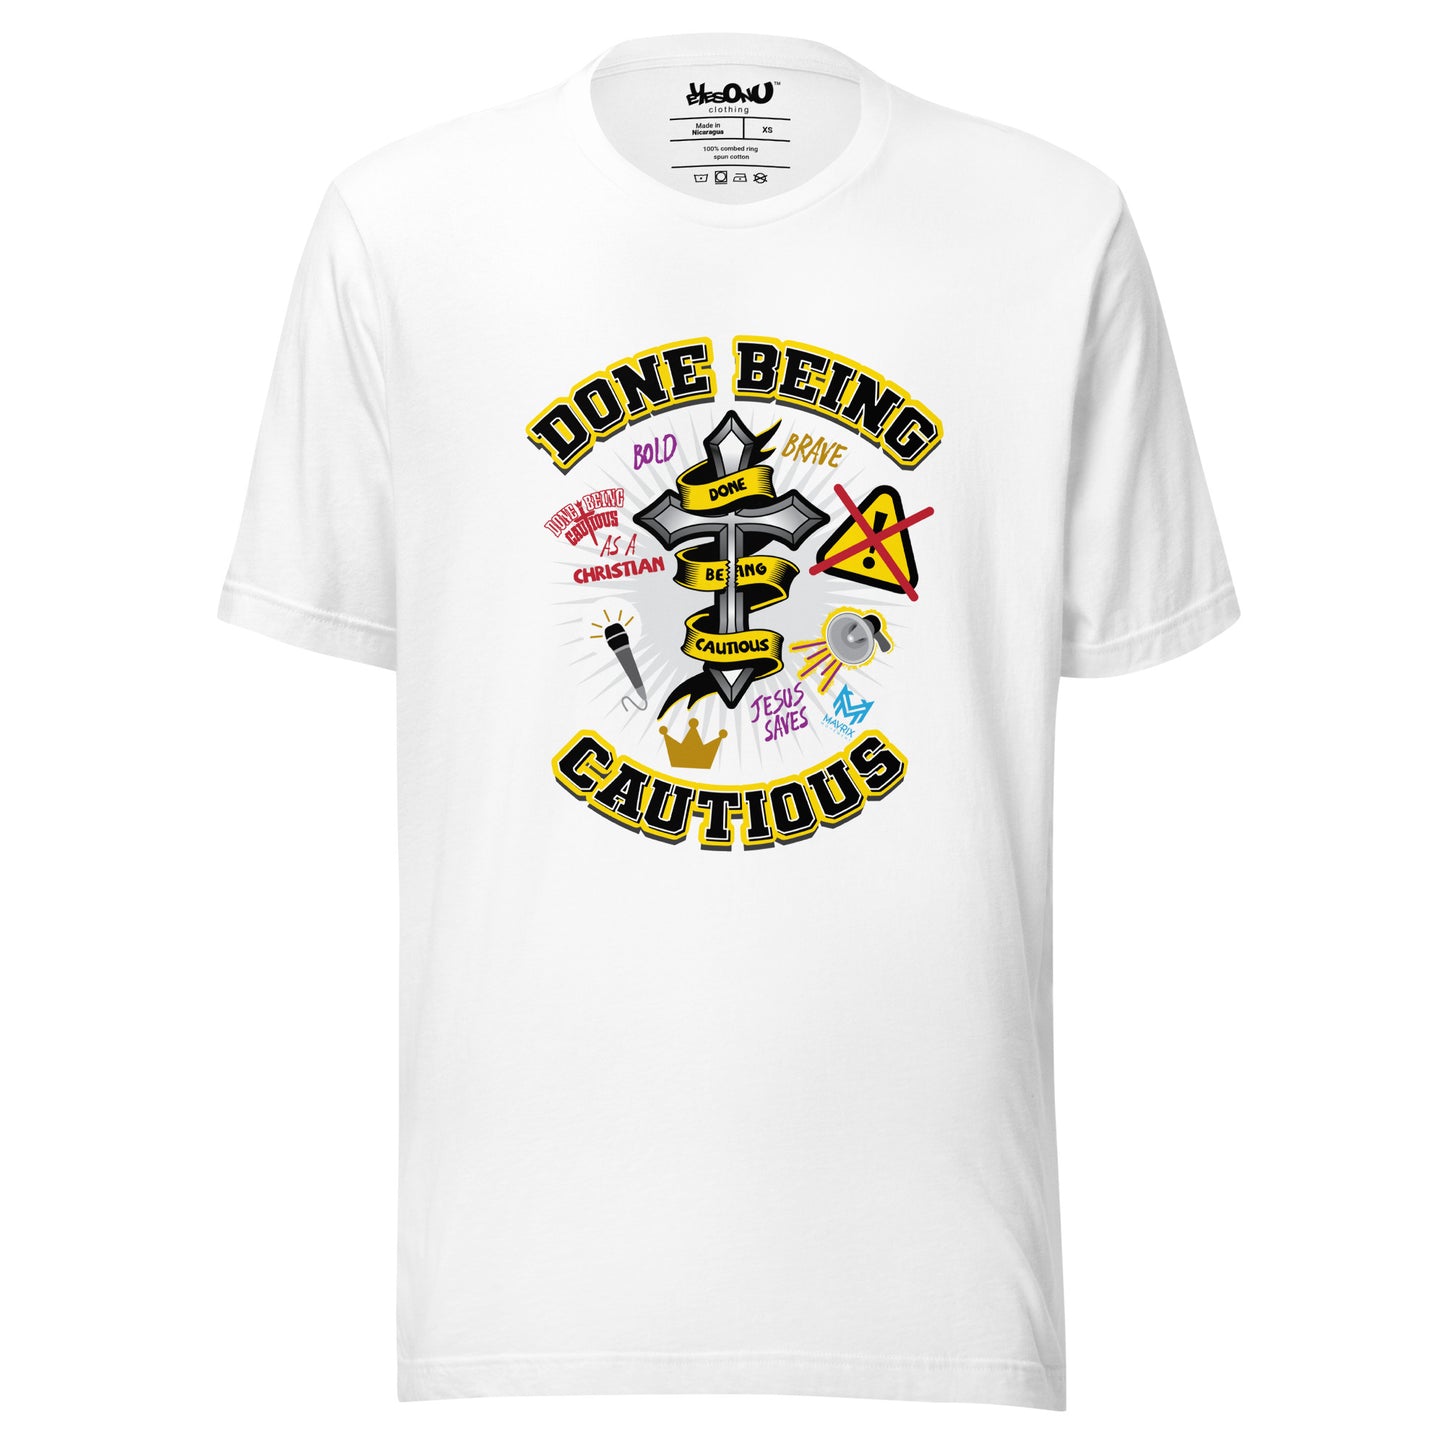 Done Being Cautious - Cross T-shirt (6 colors)